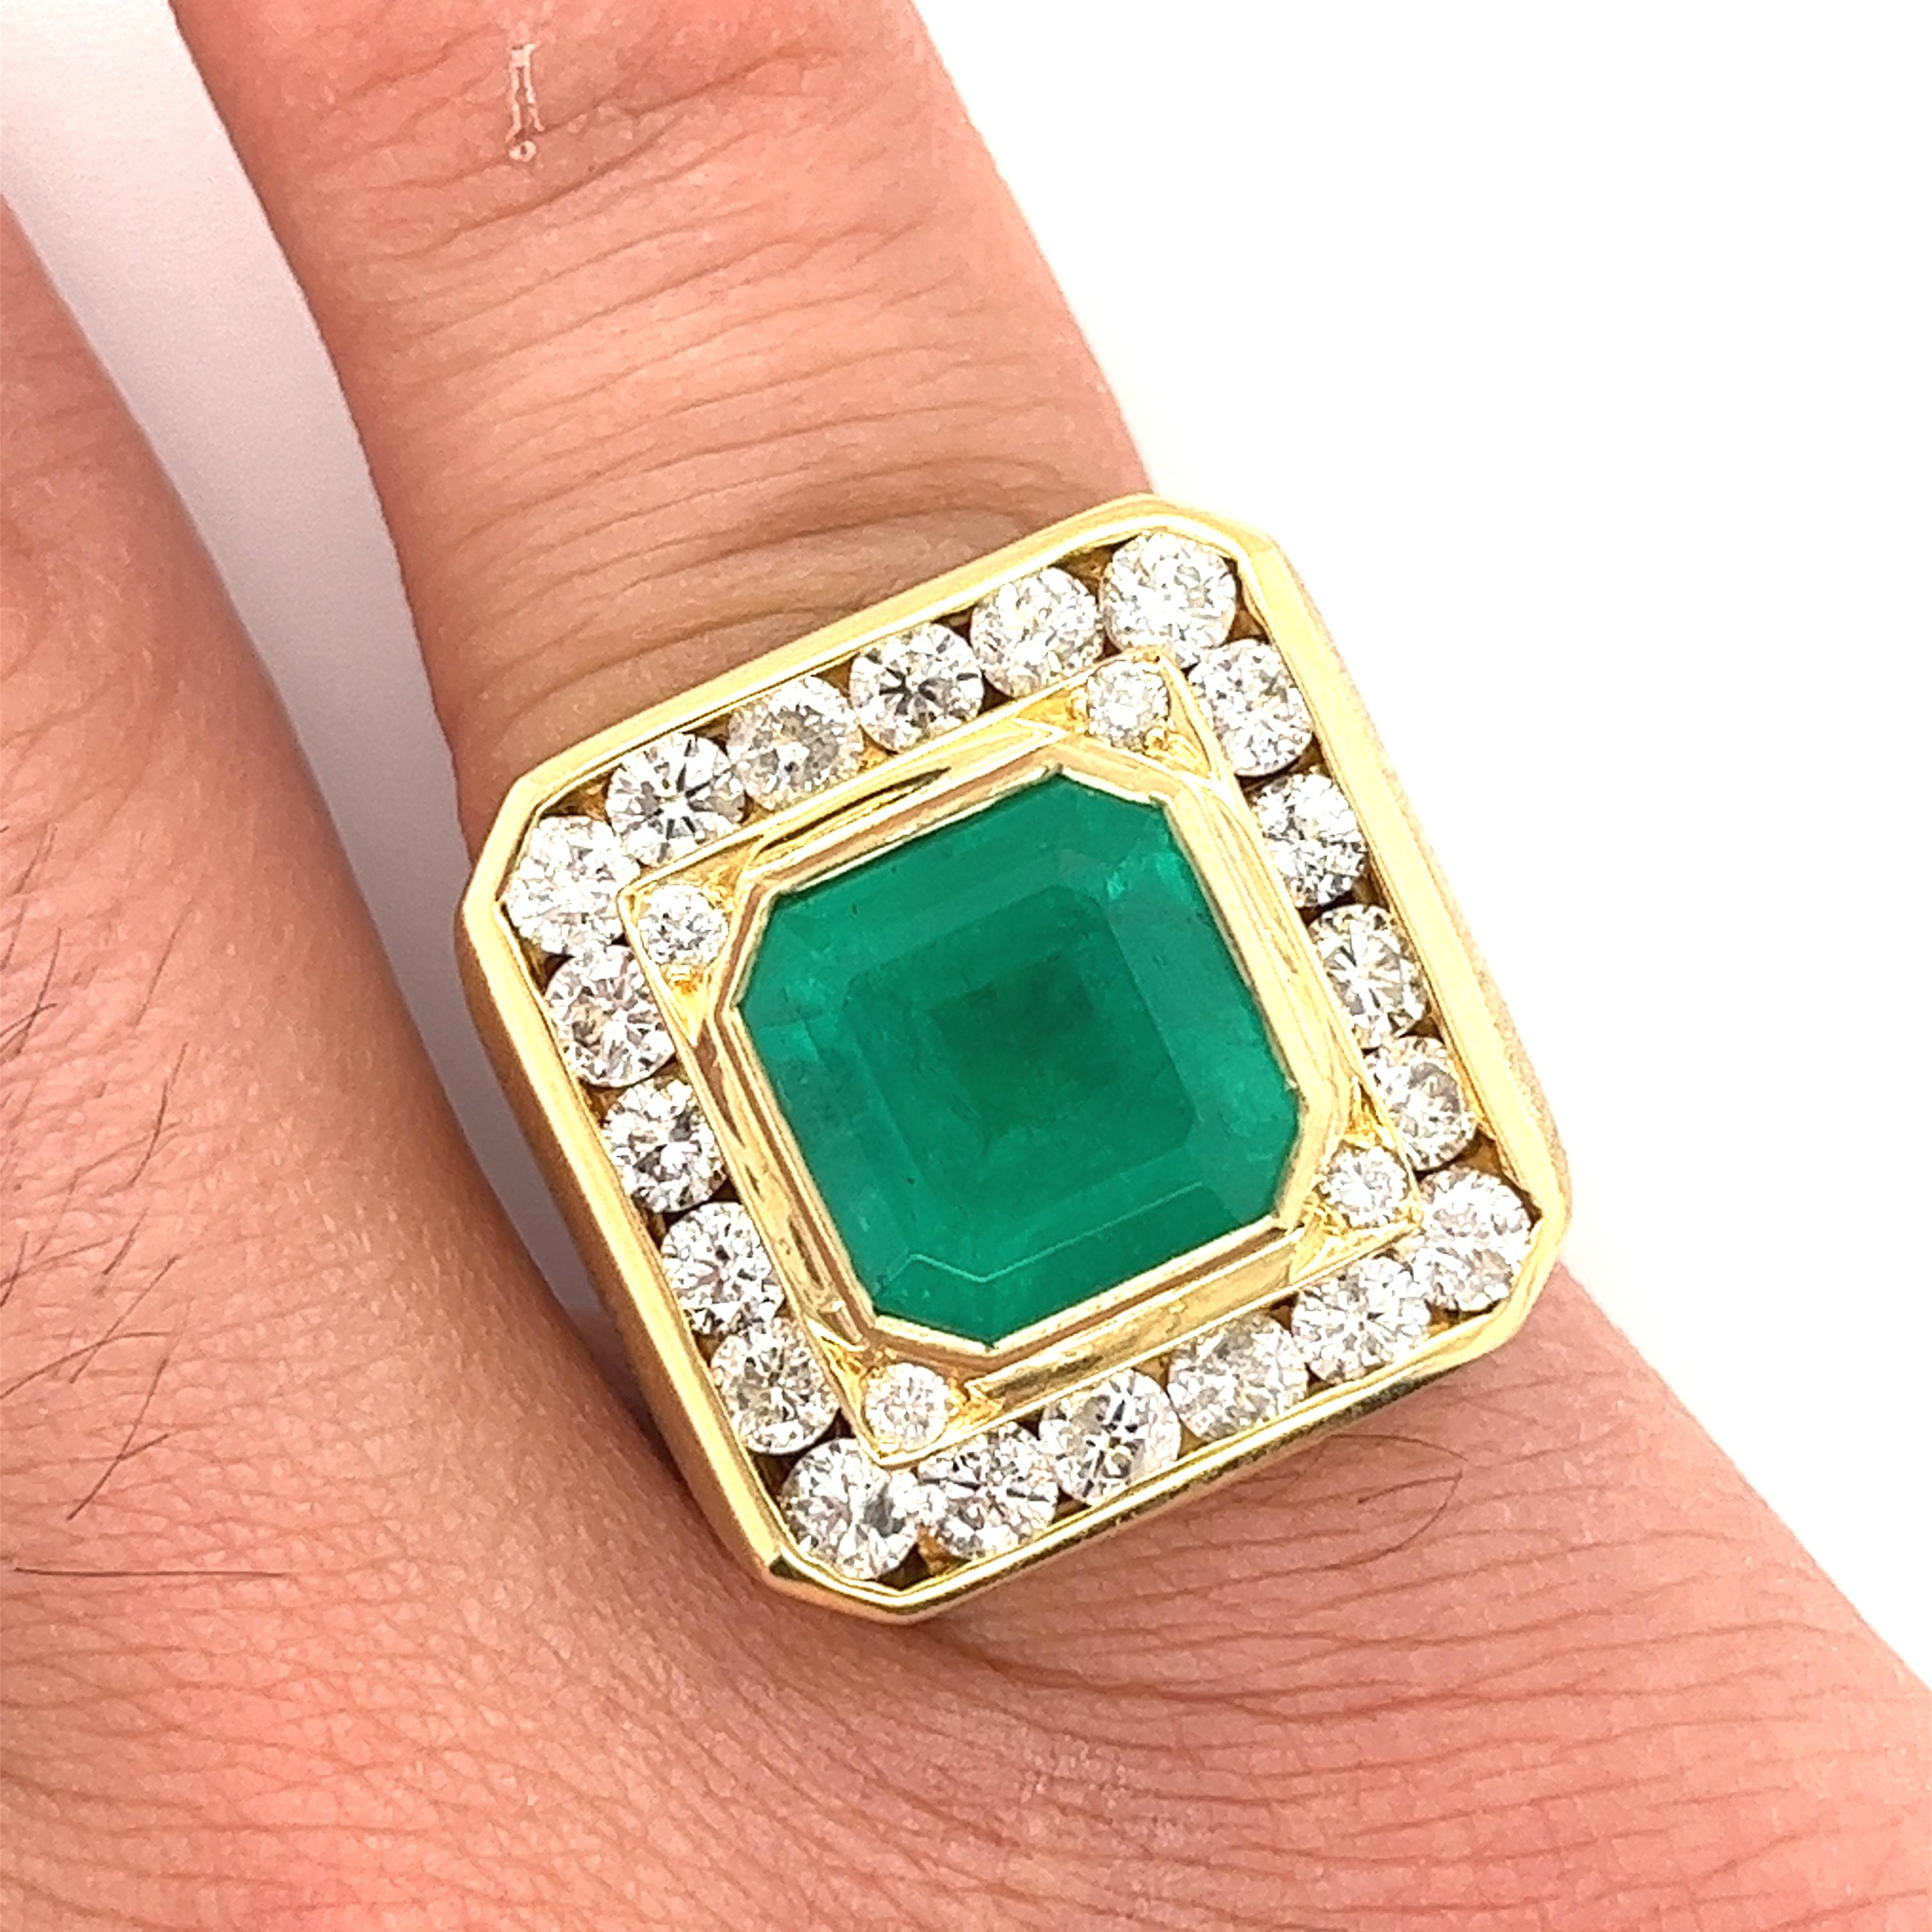 5 Carat Colombian Emerald Mens Ring with Round Diamond Halo in 18k Yellow Gold 1